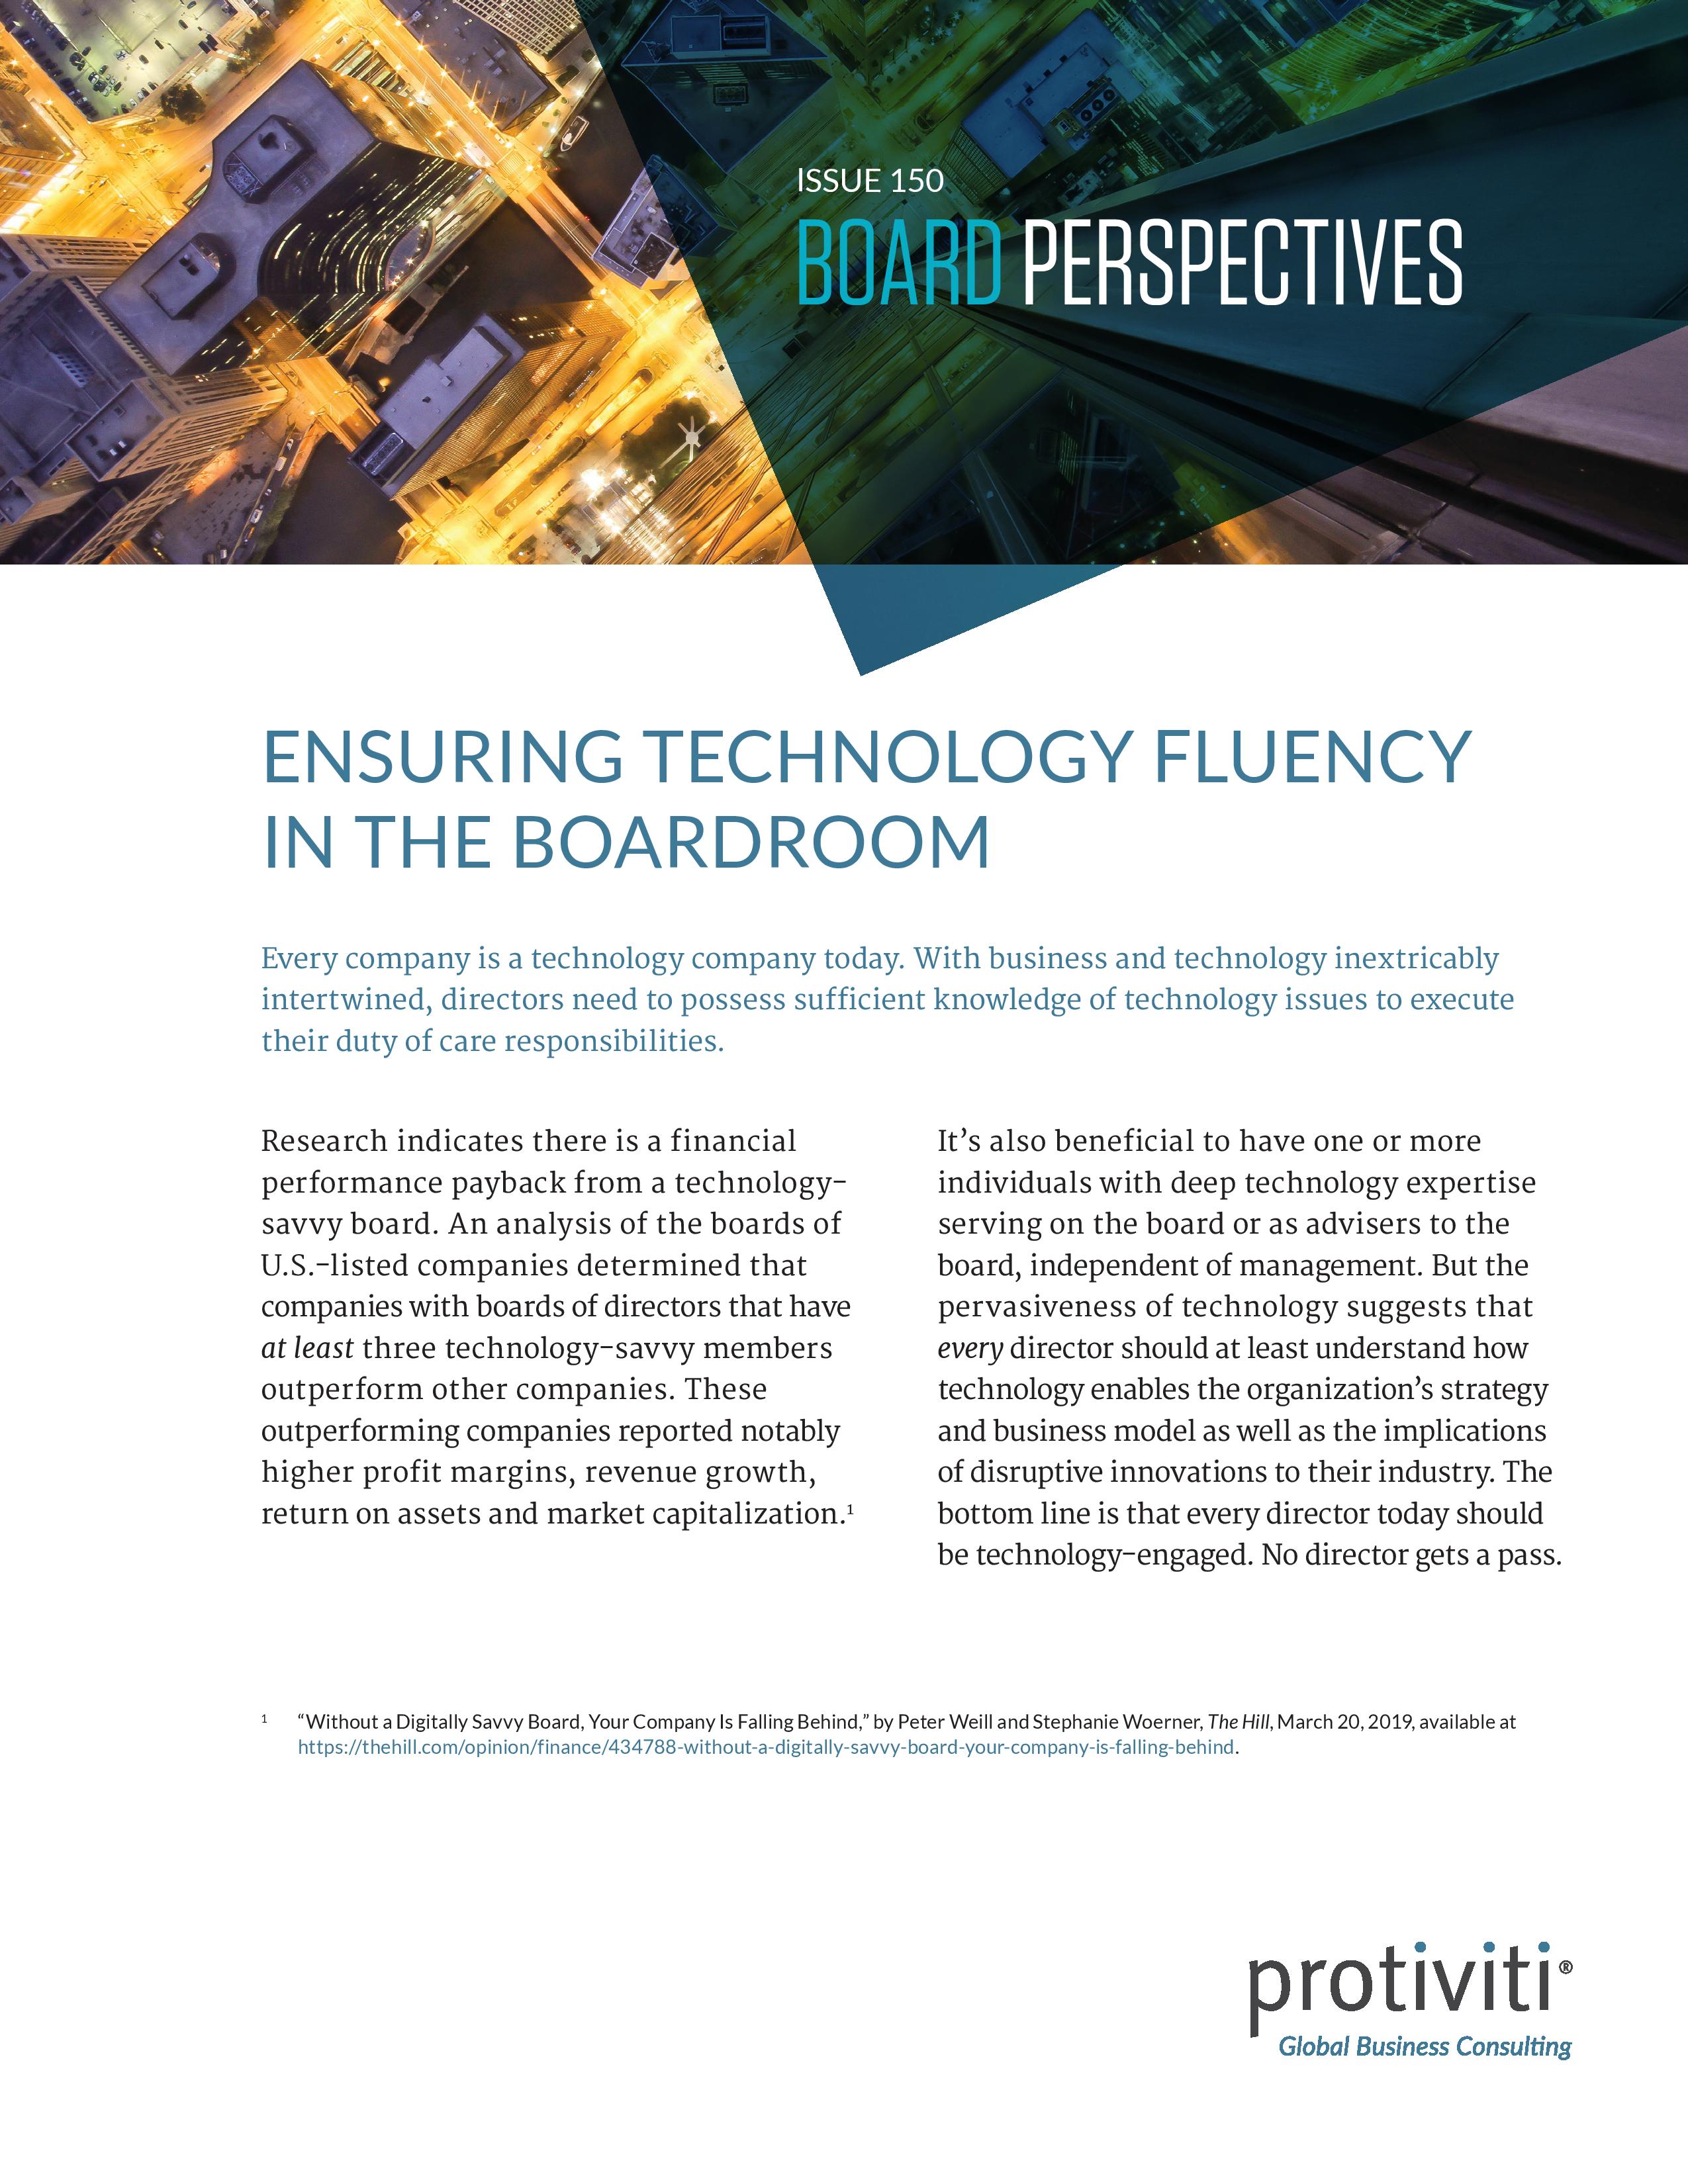 Screenshot of the first page of newsletter-bp-issue150-technology-fluency-boardroom-protiviti